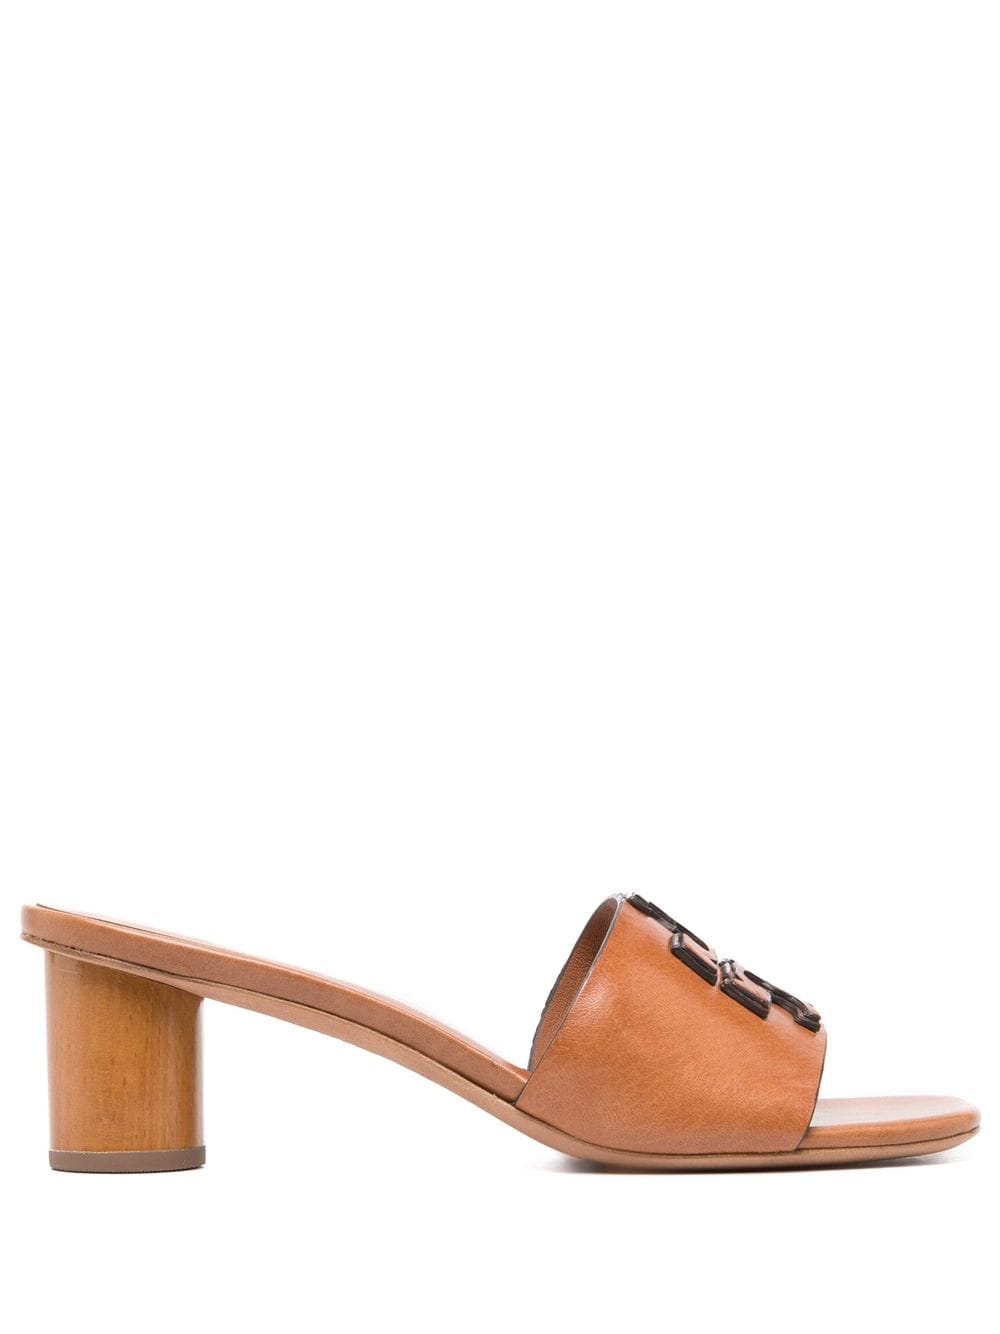 Tory Burch Ines 55mm Leather Mules - Farfetch